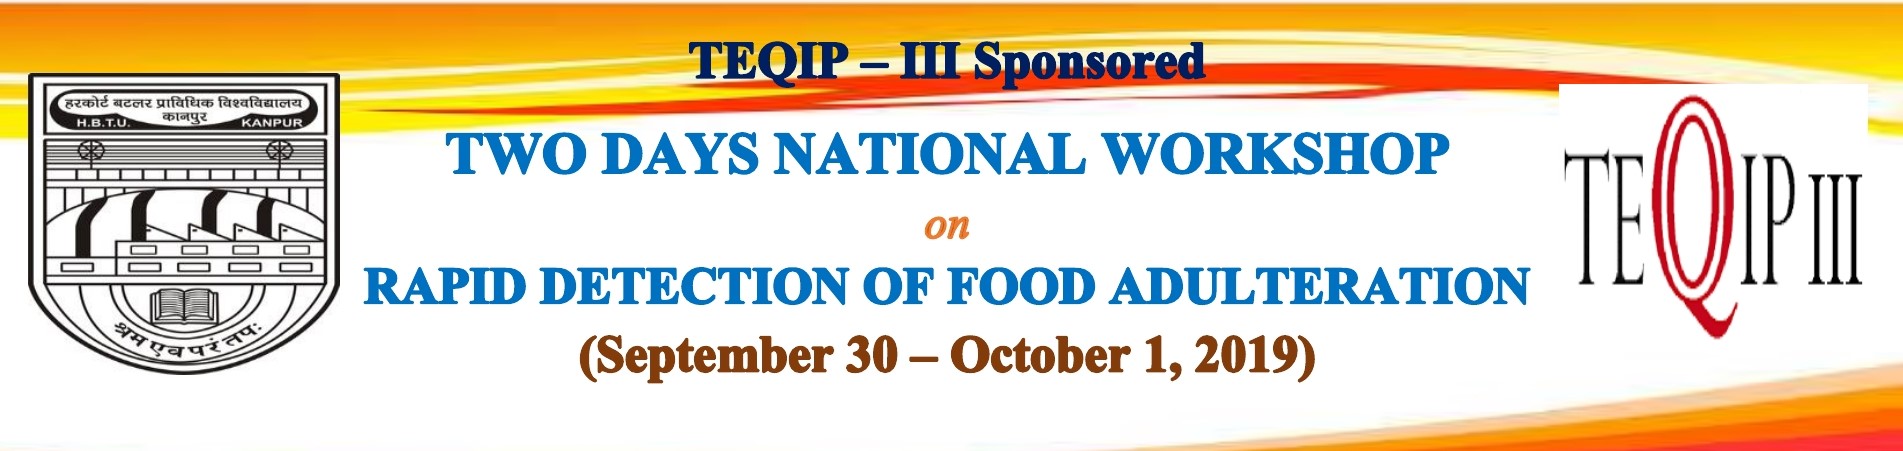 National Workshop on Rapid Detection of Food Adulteration 2019